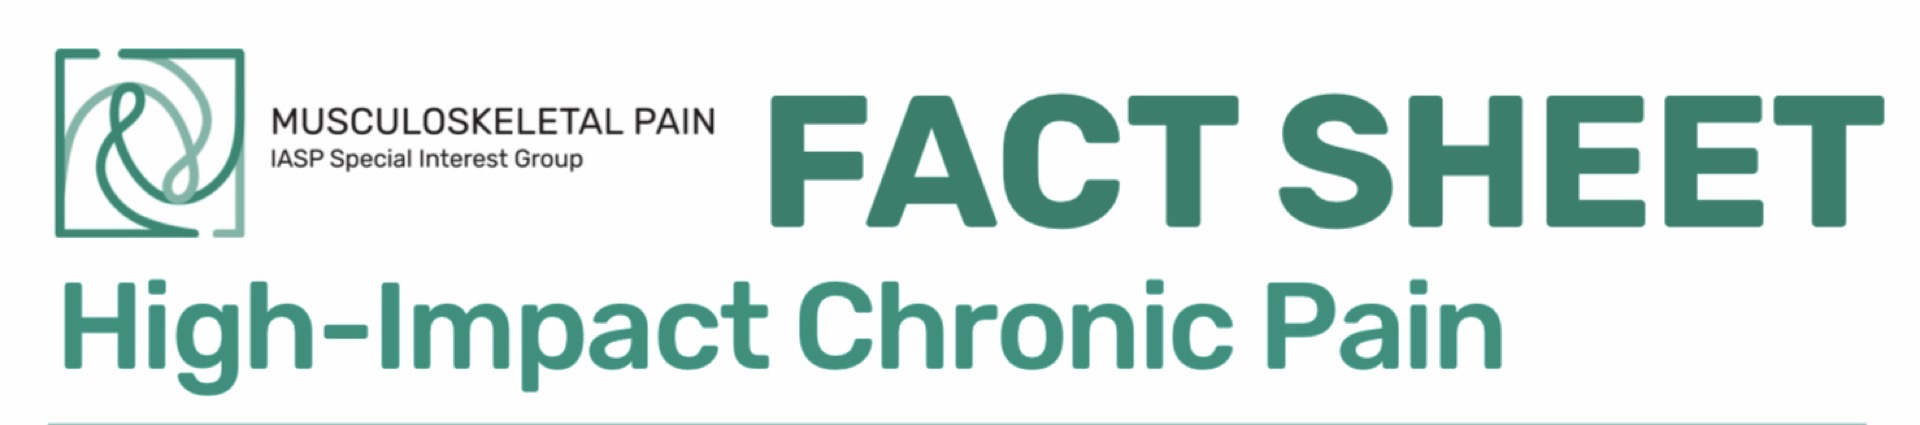 High impact chronic pain fact sheet International Association for the study of pain